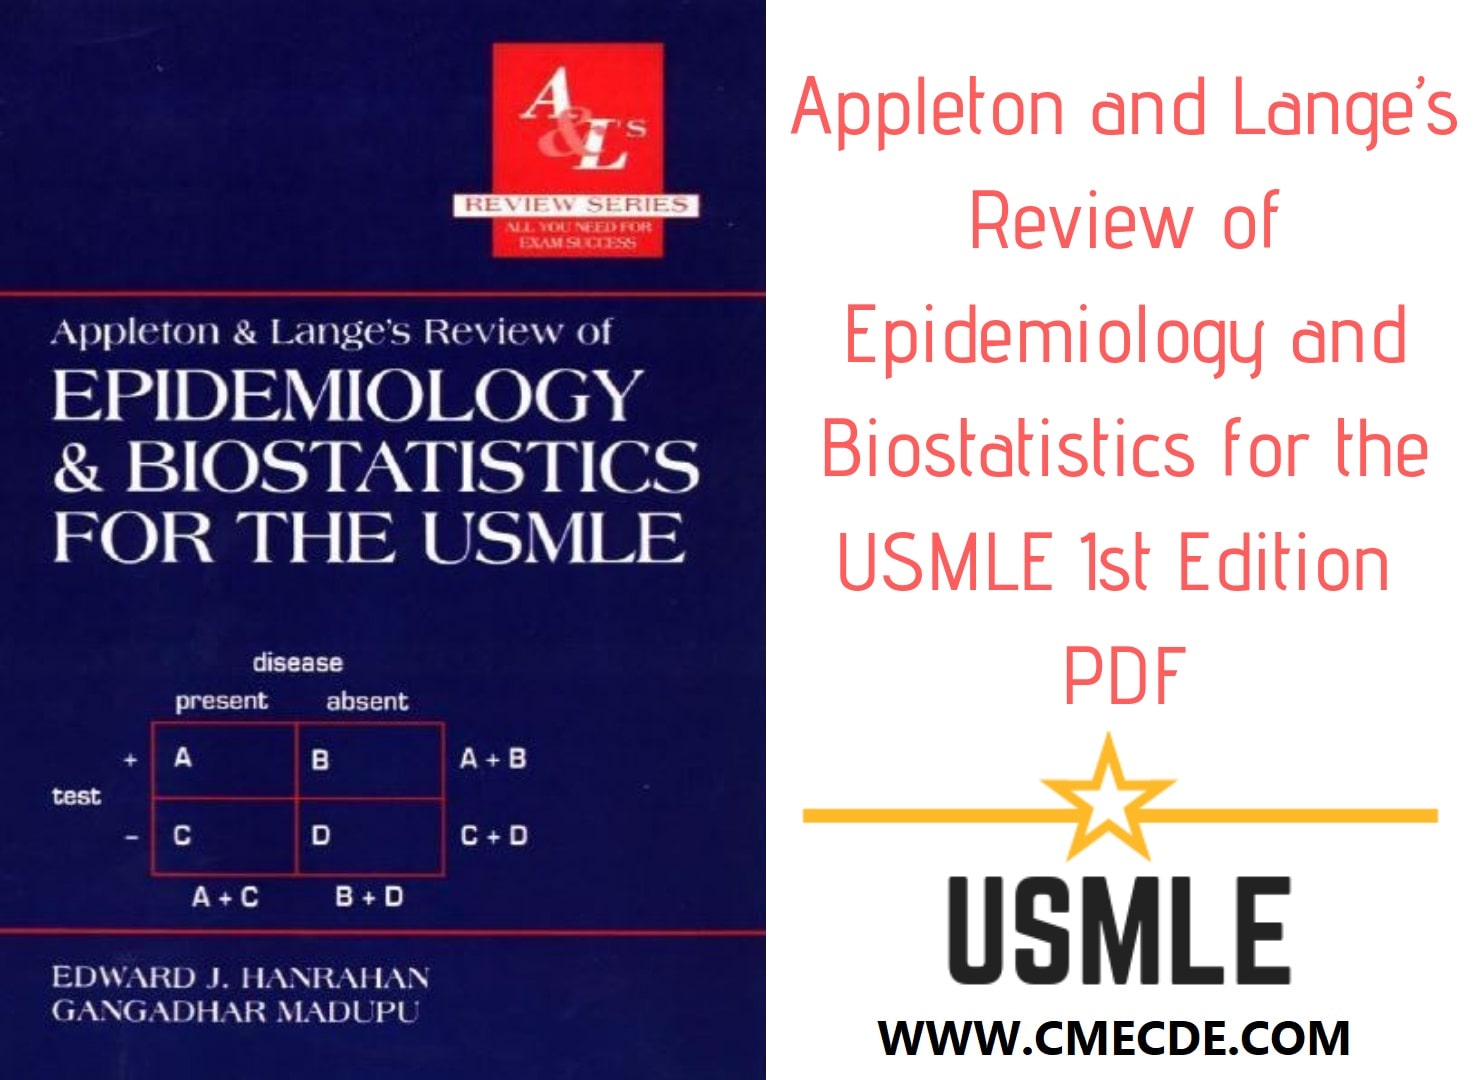 Appleton and Lange's Review of Epidemiology and Biostatistics for the USMLE 1st Edition Download